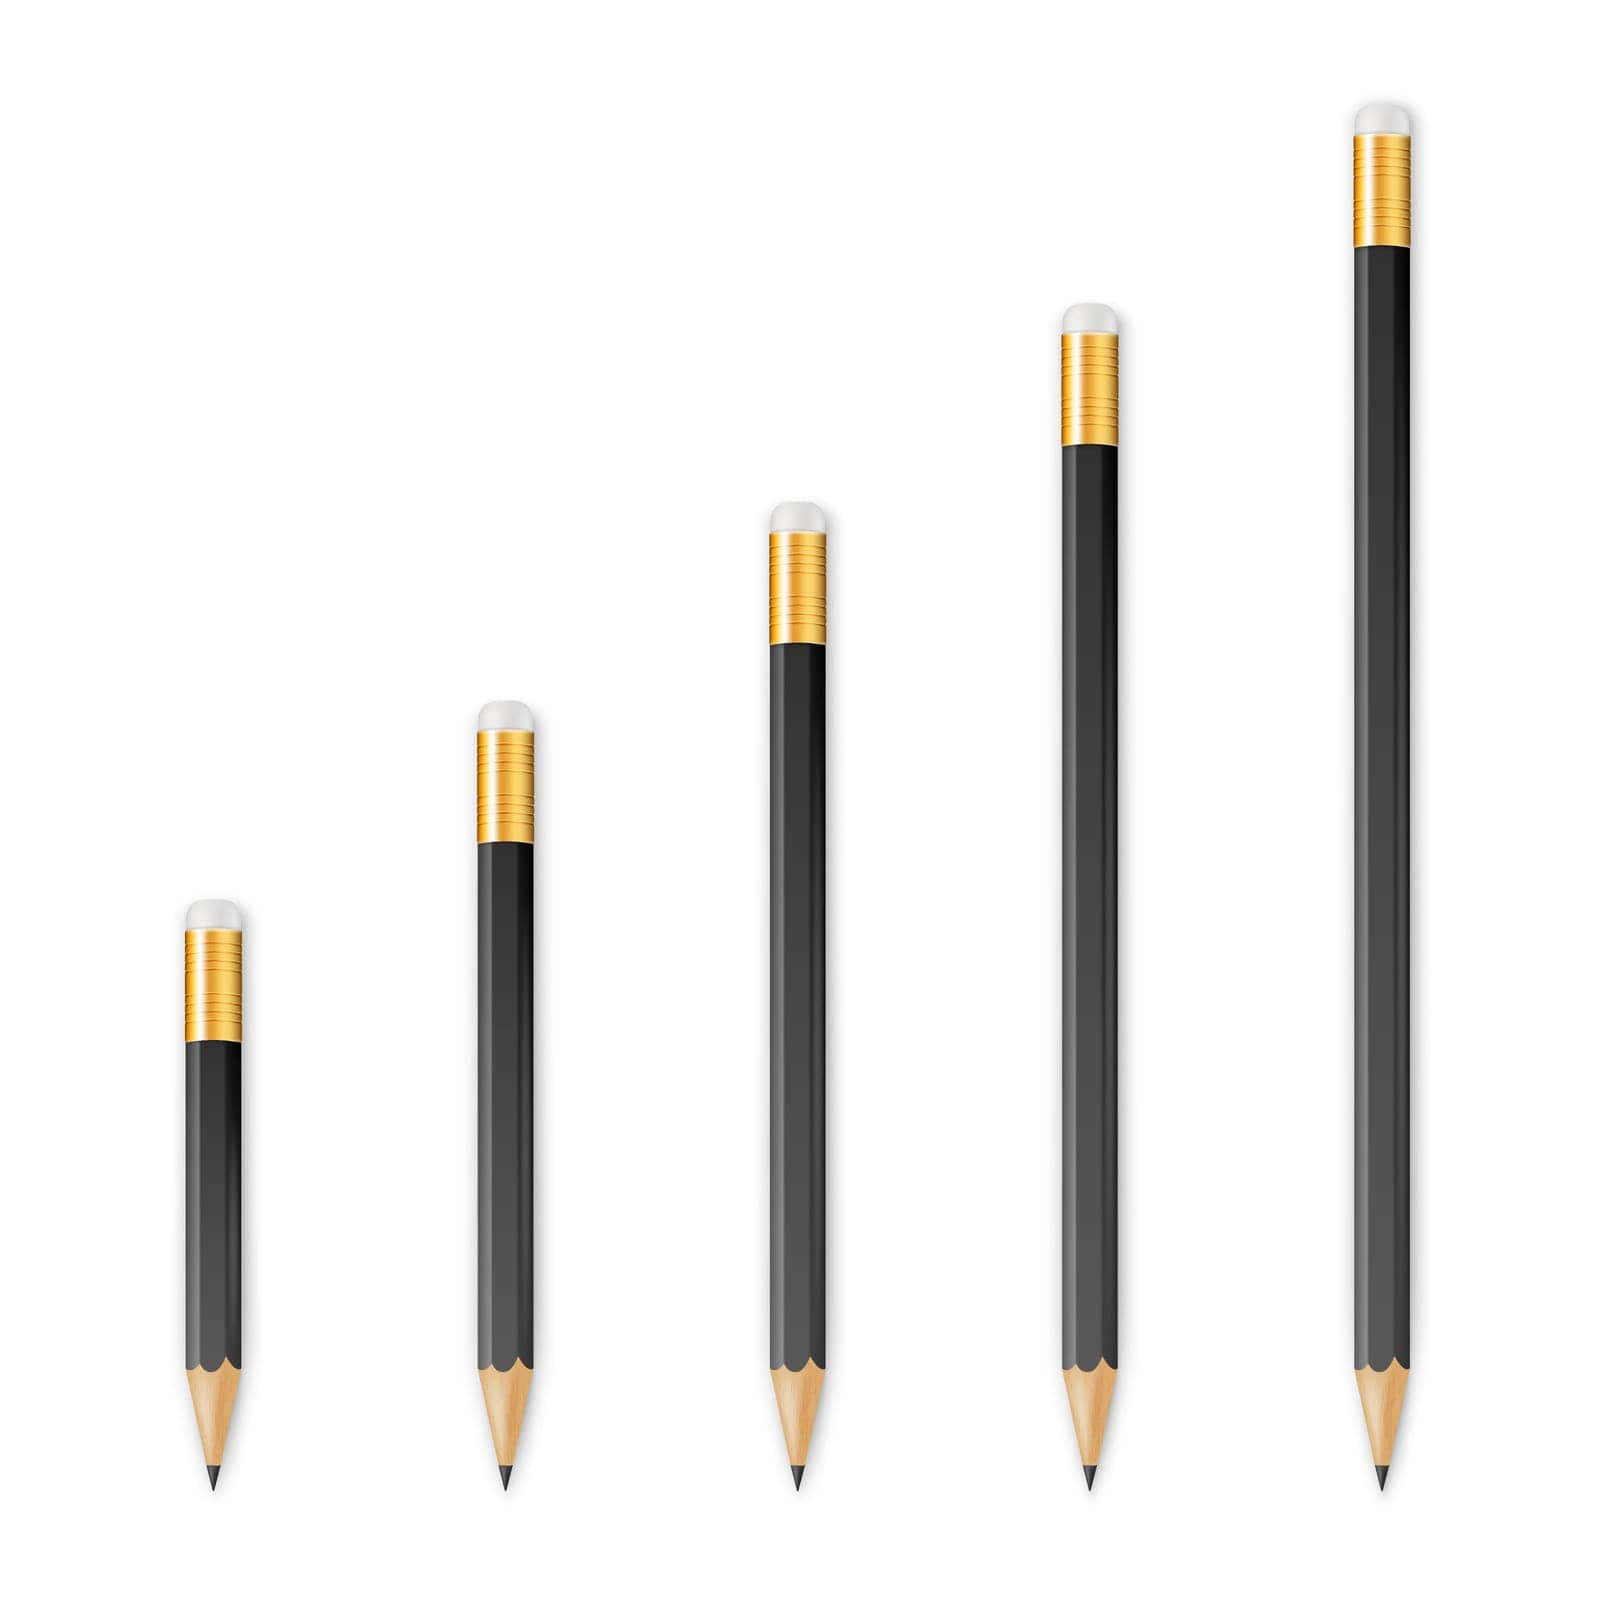 Black wooden sharp pencils isolated on a white background. Vector EPS10 illustration.